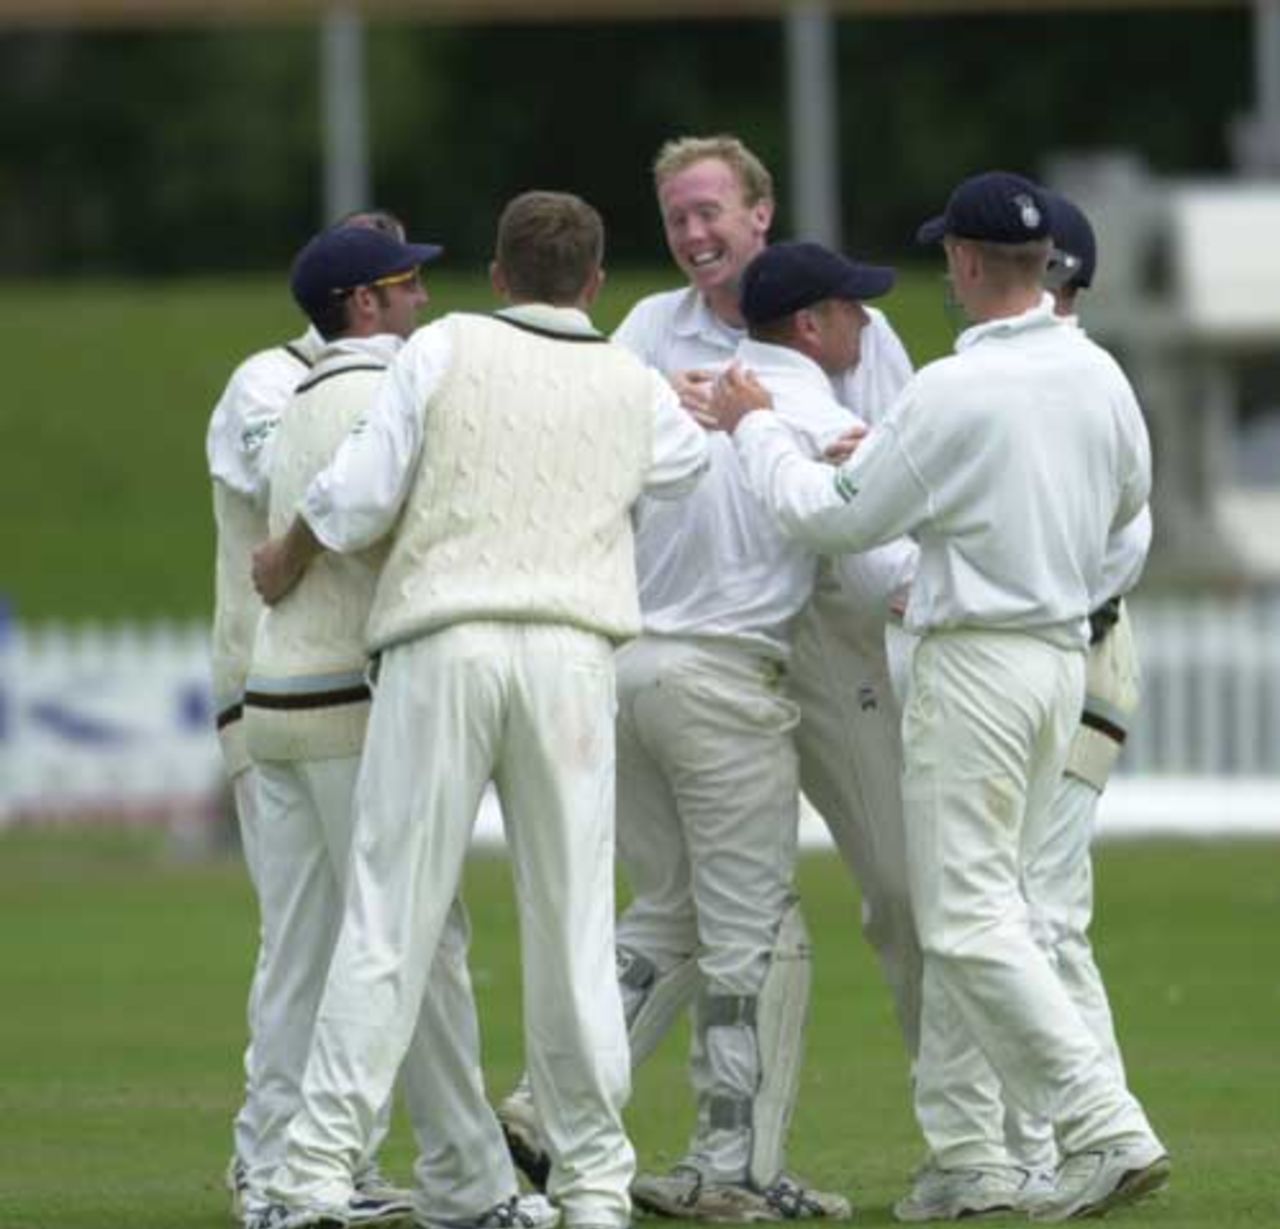 Kevin Dean celebrates as he claims another wicket for Derbyshire, Welton out for 4 runs.  Frizzell CC, 22nd July 2002.